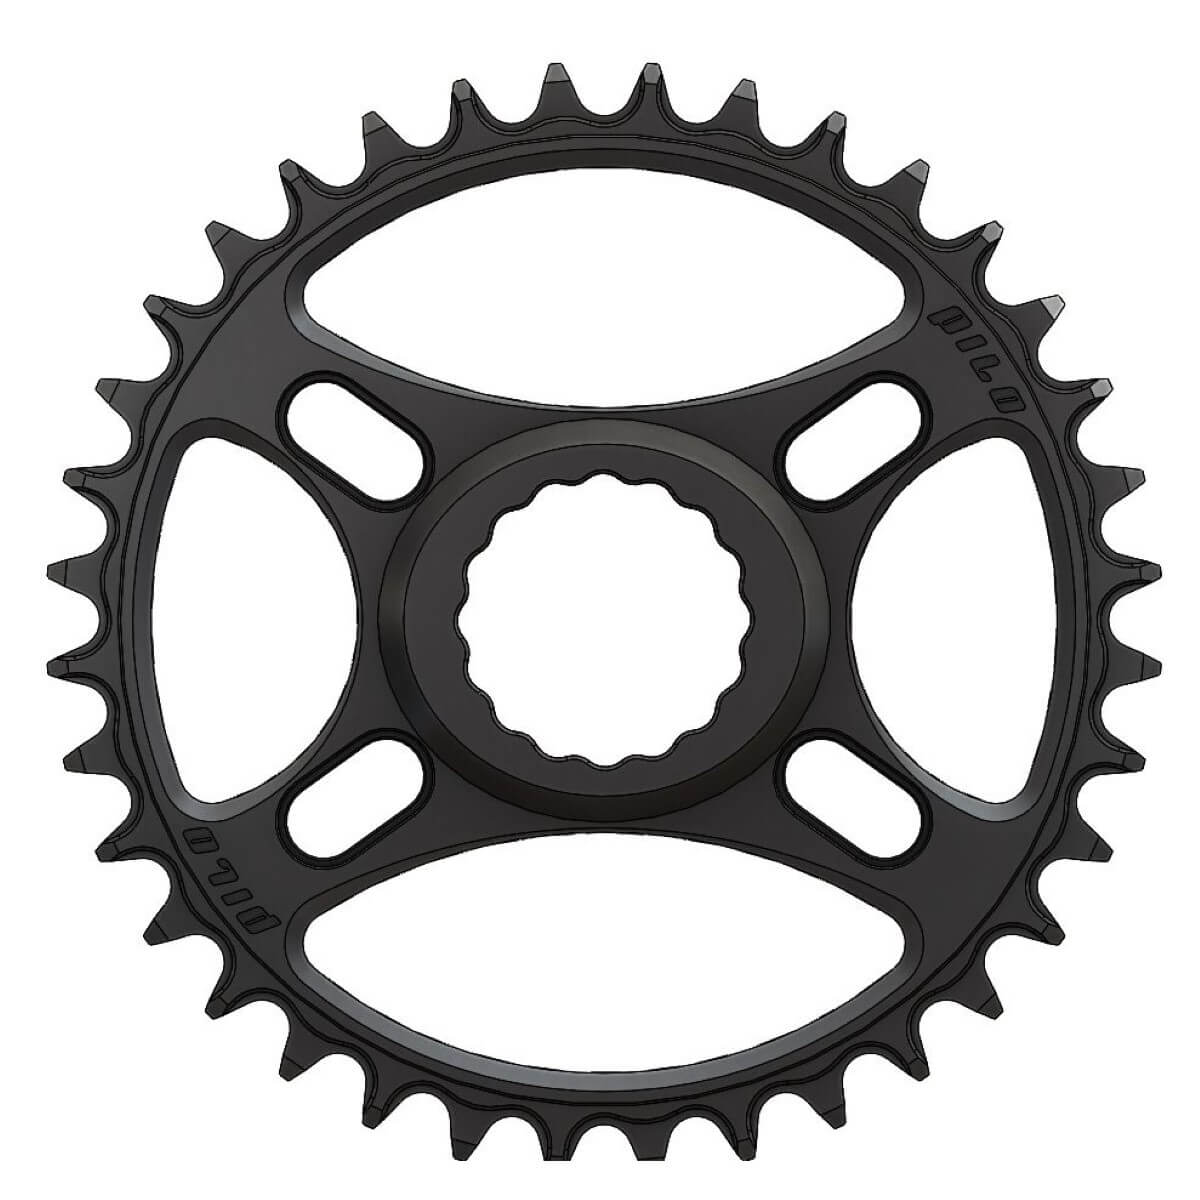 Pilo C63 Chainring Narrow Wide 36T for Race Face direct mount.  Hyperglide+ Compatible